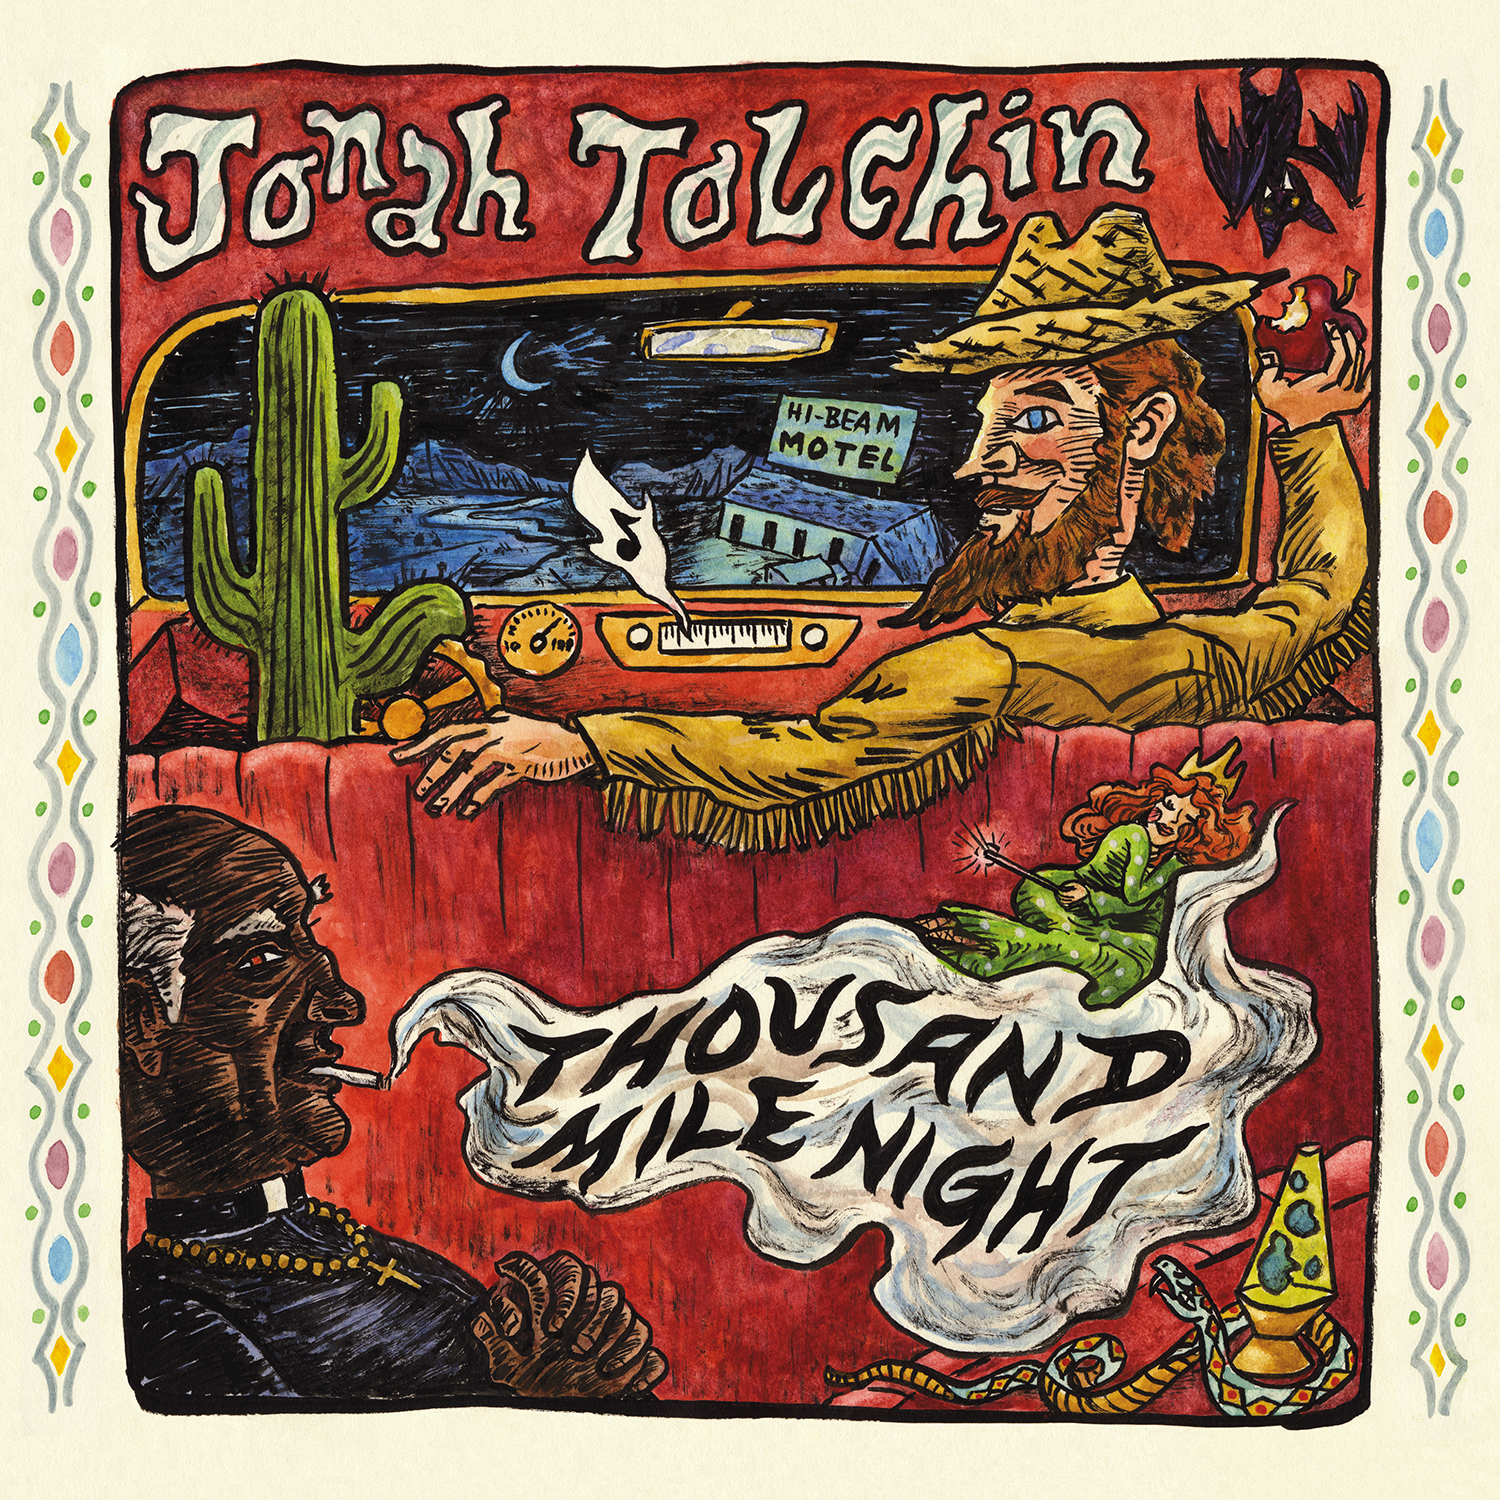 Jonah Tolchin is taking "Thousand Mile Night" to Europe in December